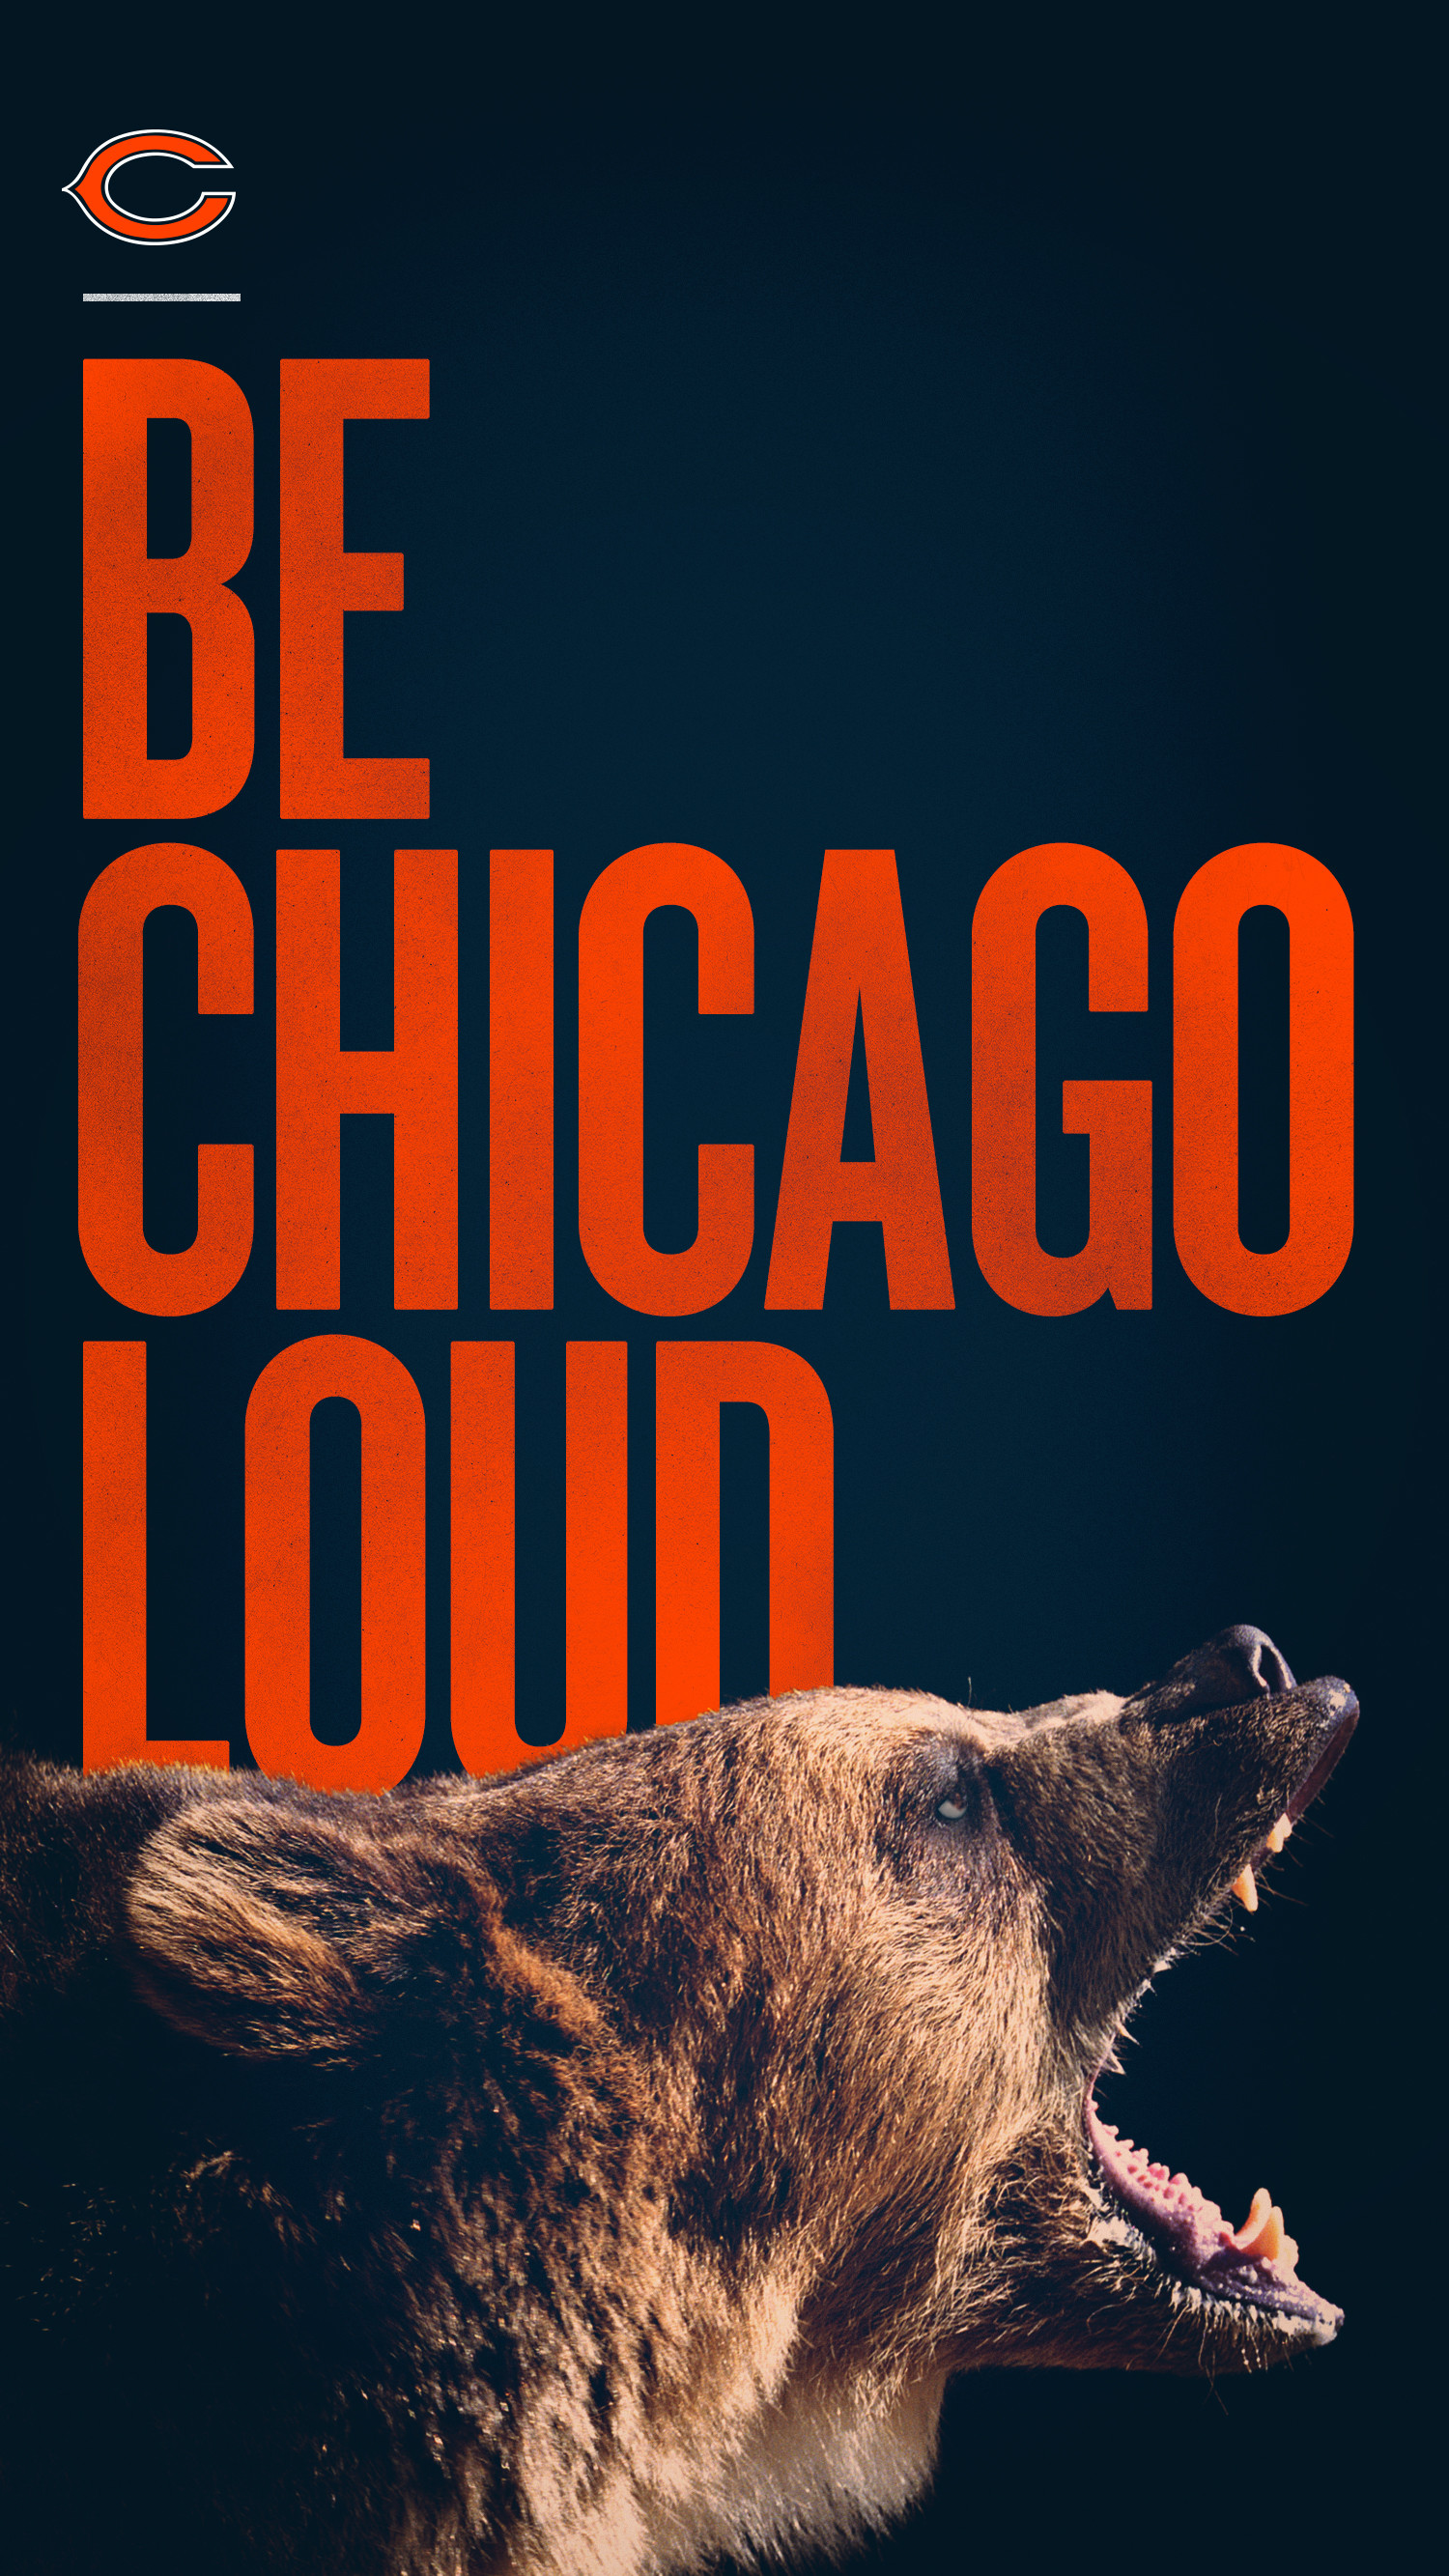 1500x2667 Shout it out and let the world know with this Chicago Bears smartphone  wallpaper from